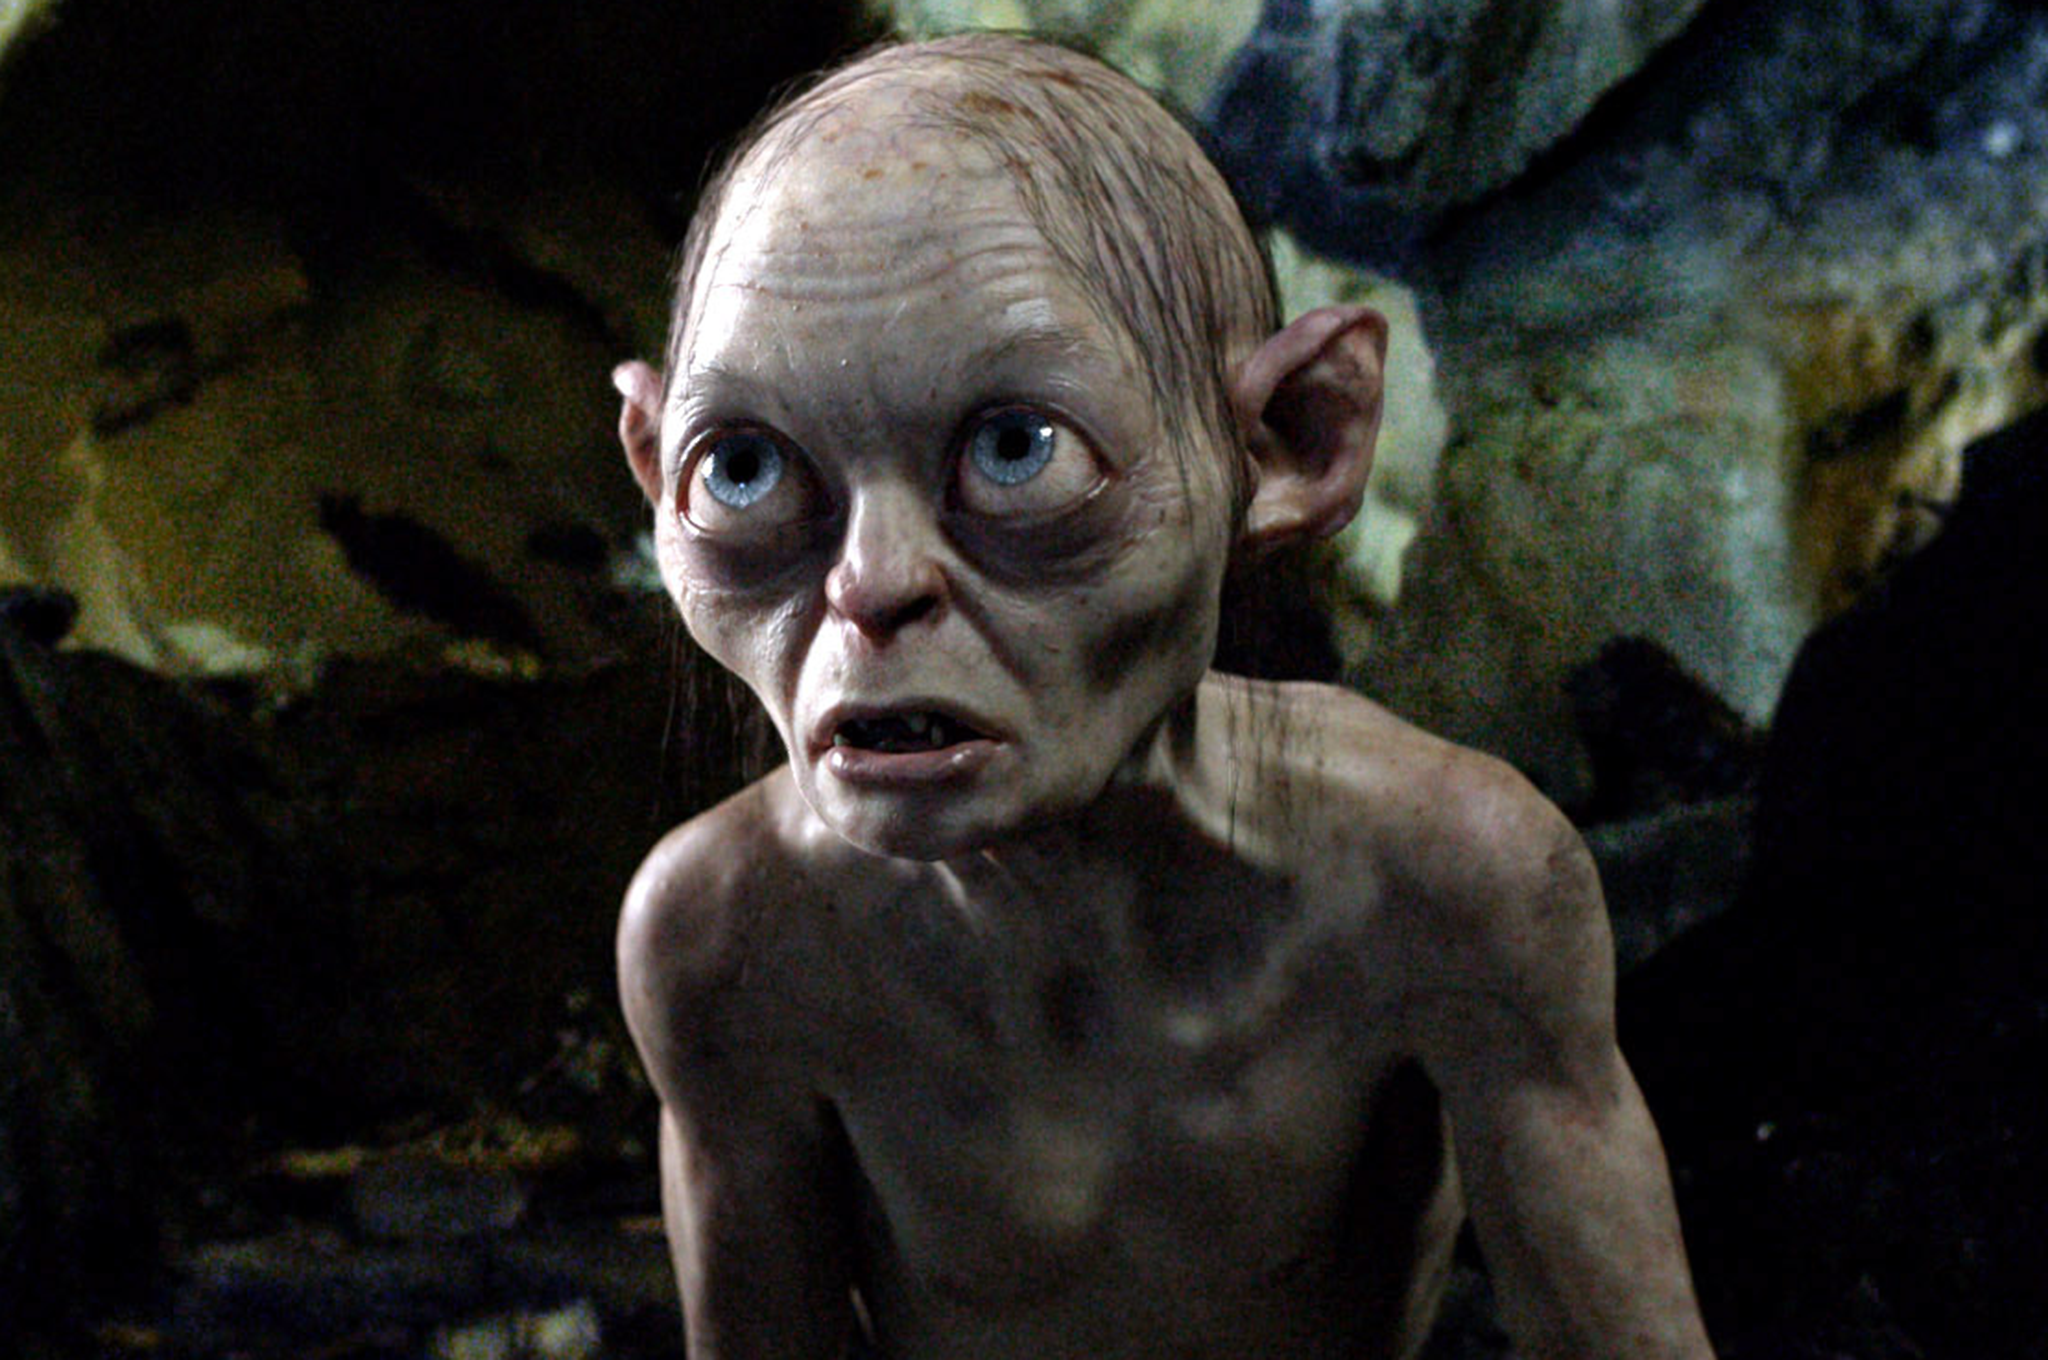 A judge has ordered a character assessment of Gollum